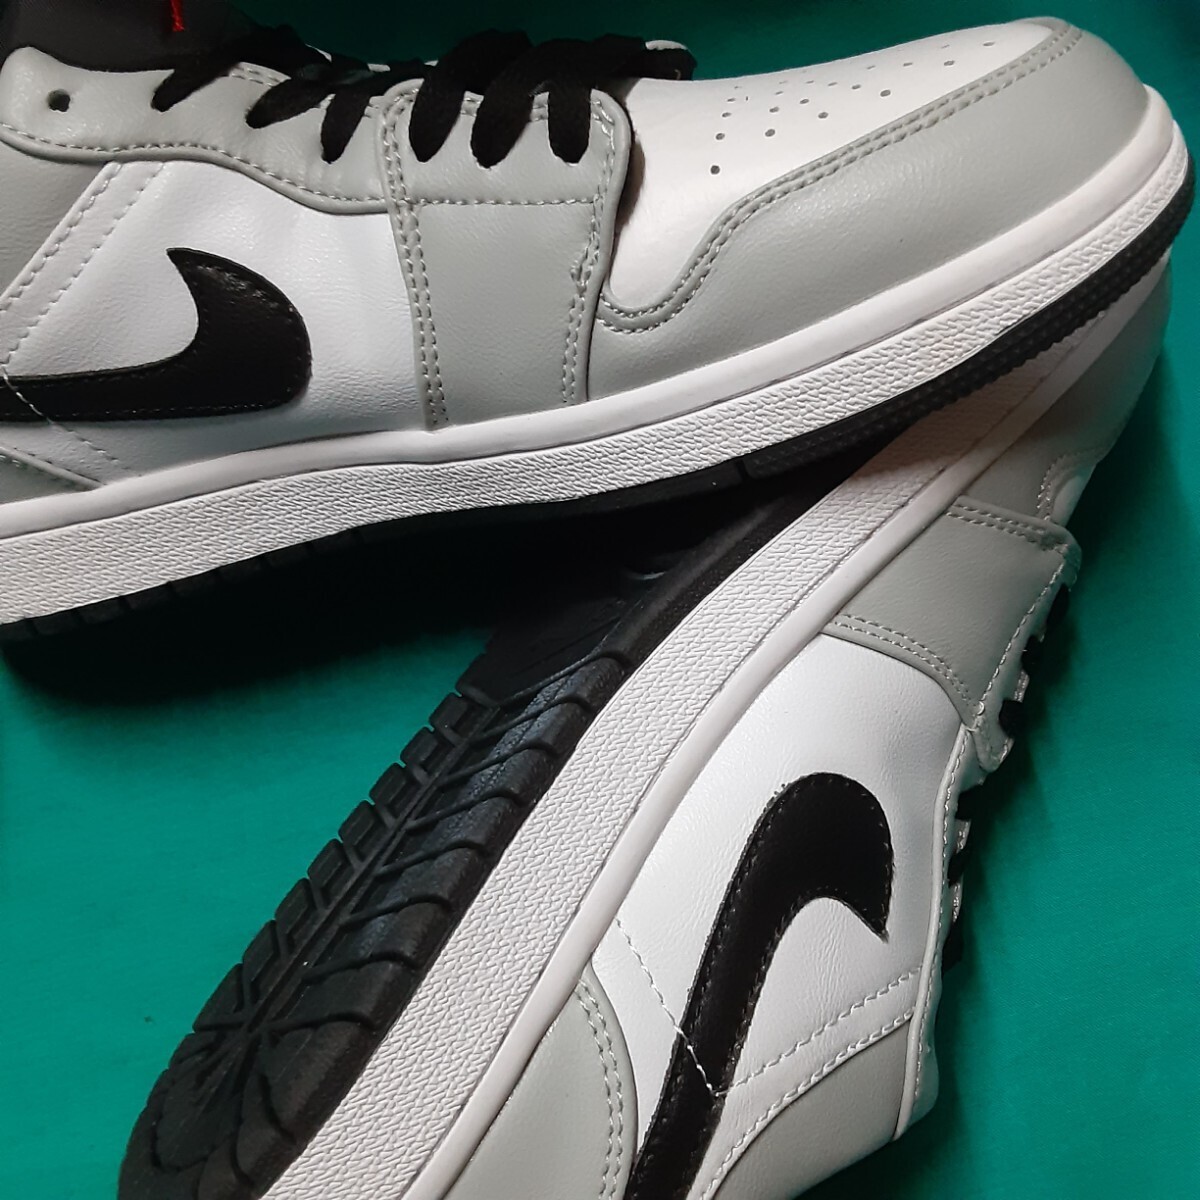  most price! superior article! masterpiece Legend low! Nike air Jordan 1 LOW high class leather sneakers! archive color! light smoked gray! grey white red black 26